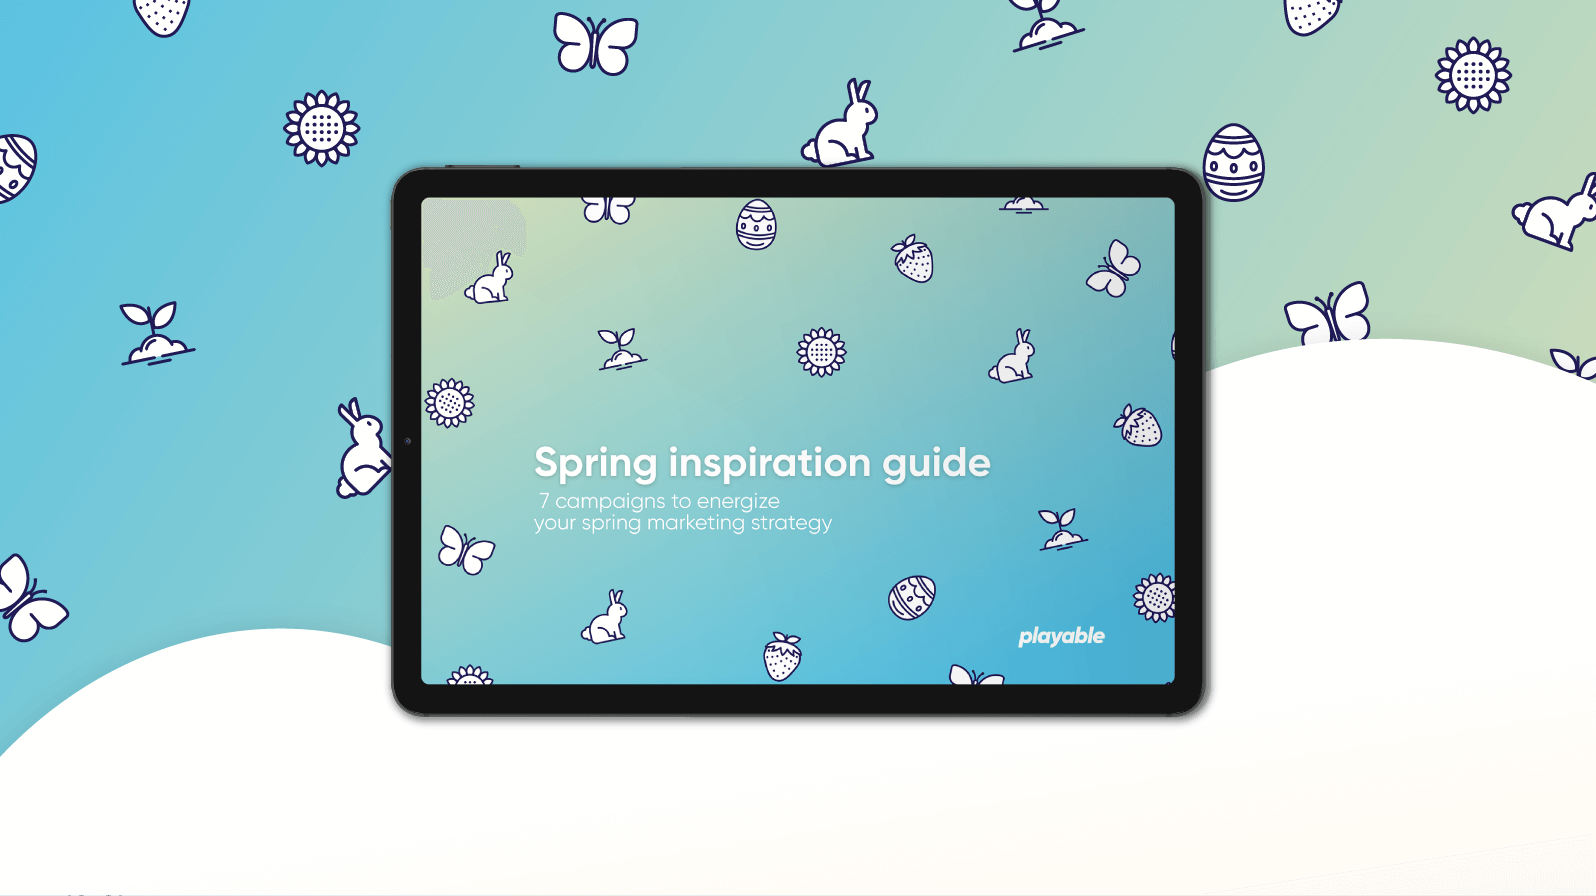 Spring inspiration guide from Playable